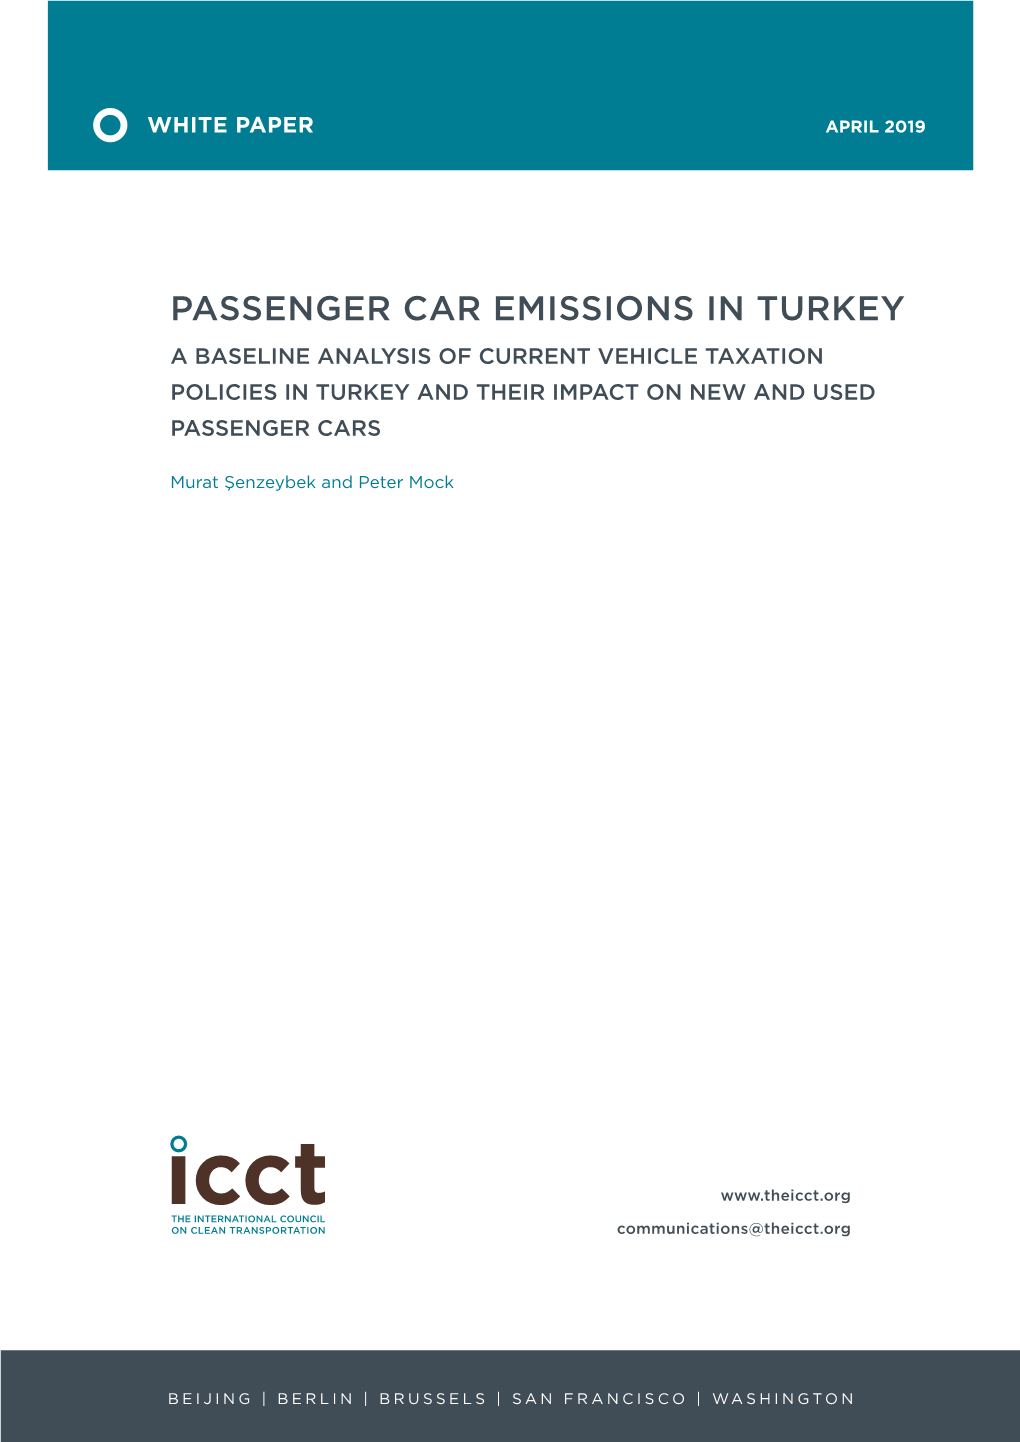 Passenger Car Emissions in Turkey a Baseline Analysis of Current Vehicle Taxation Policies in Turkey and Their Impact on New and Used Passenger Cars